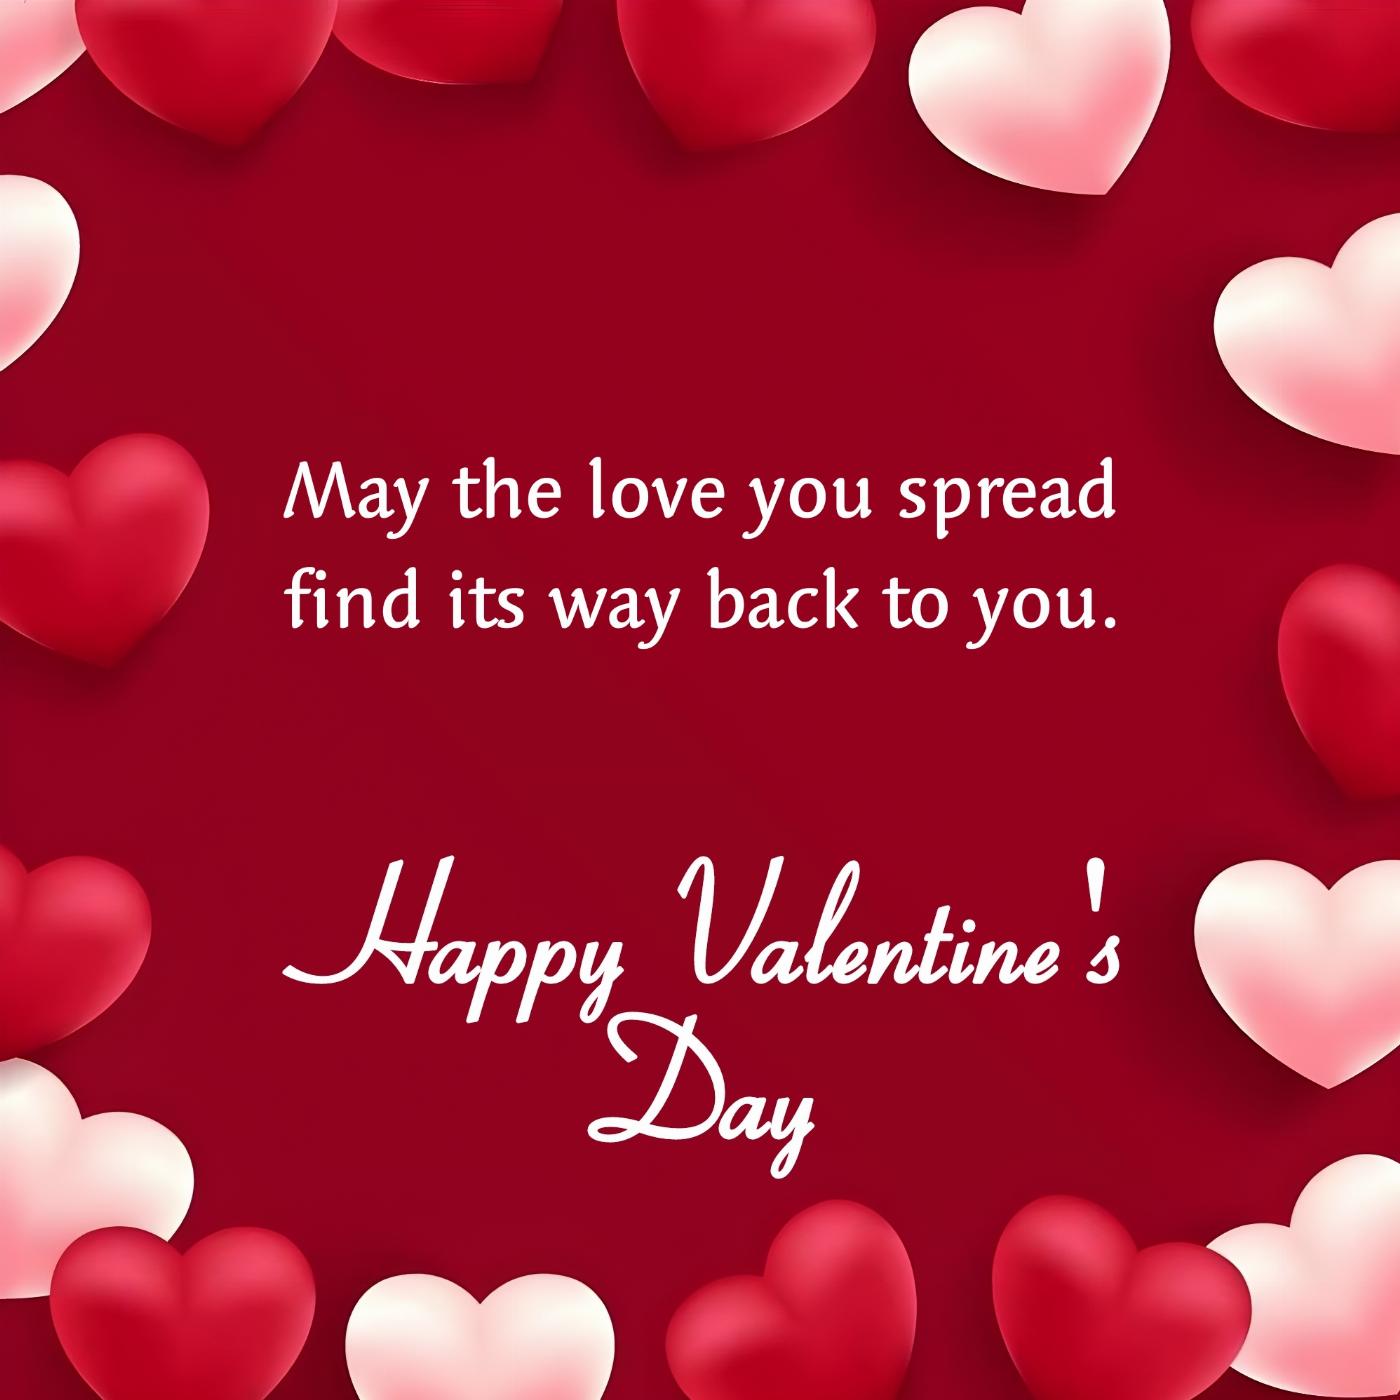 May the love you spread find its way back to you